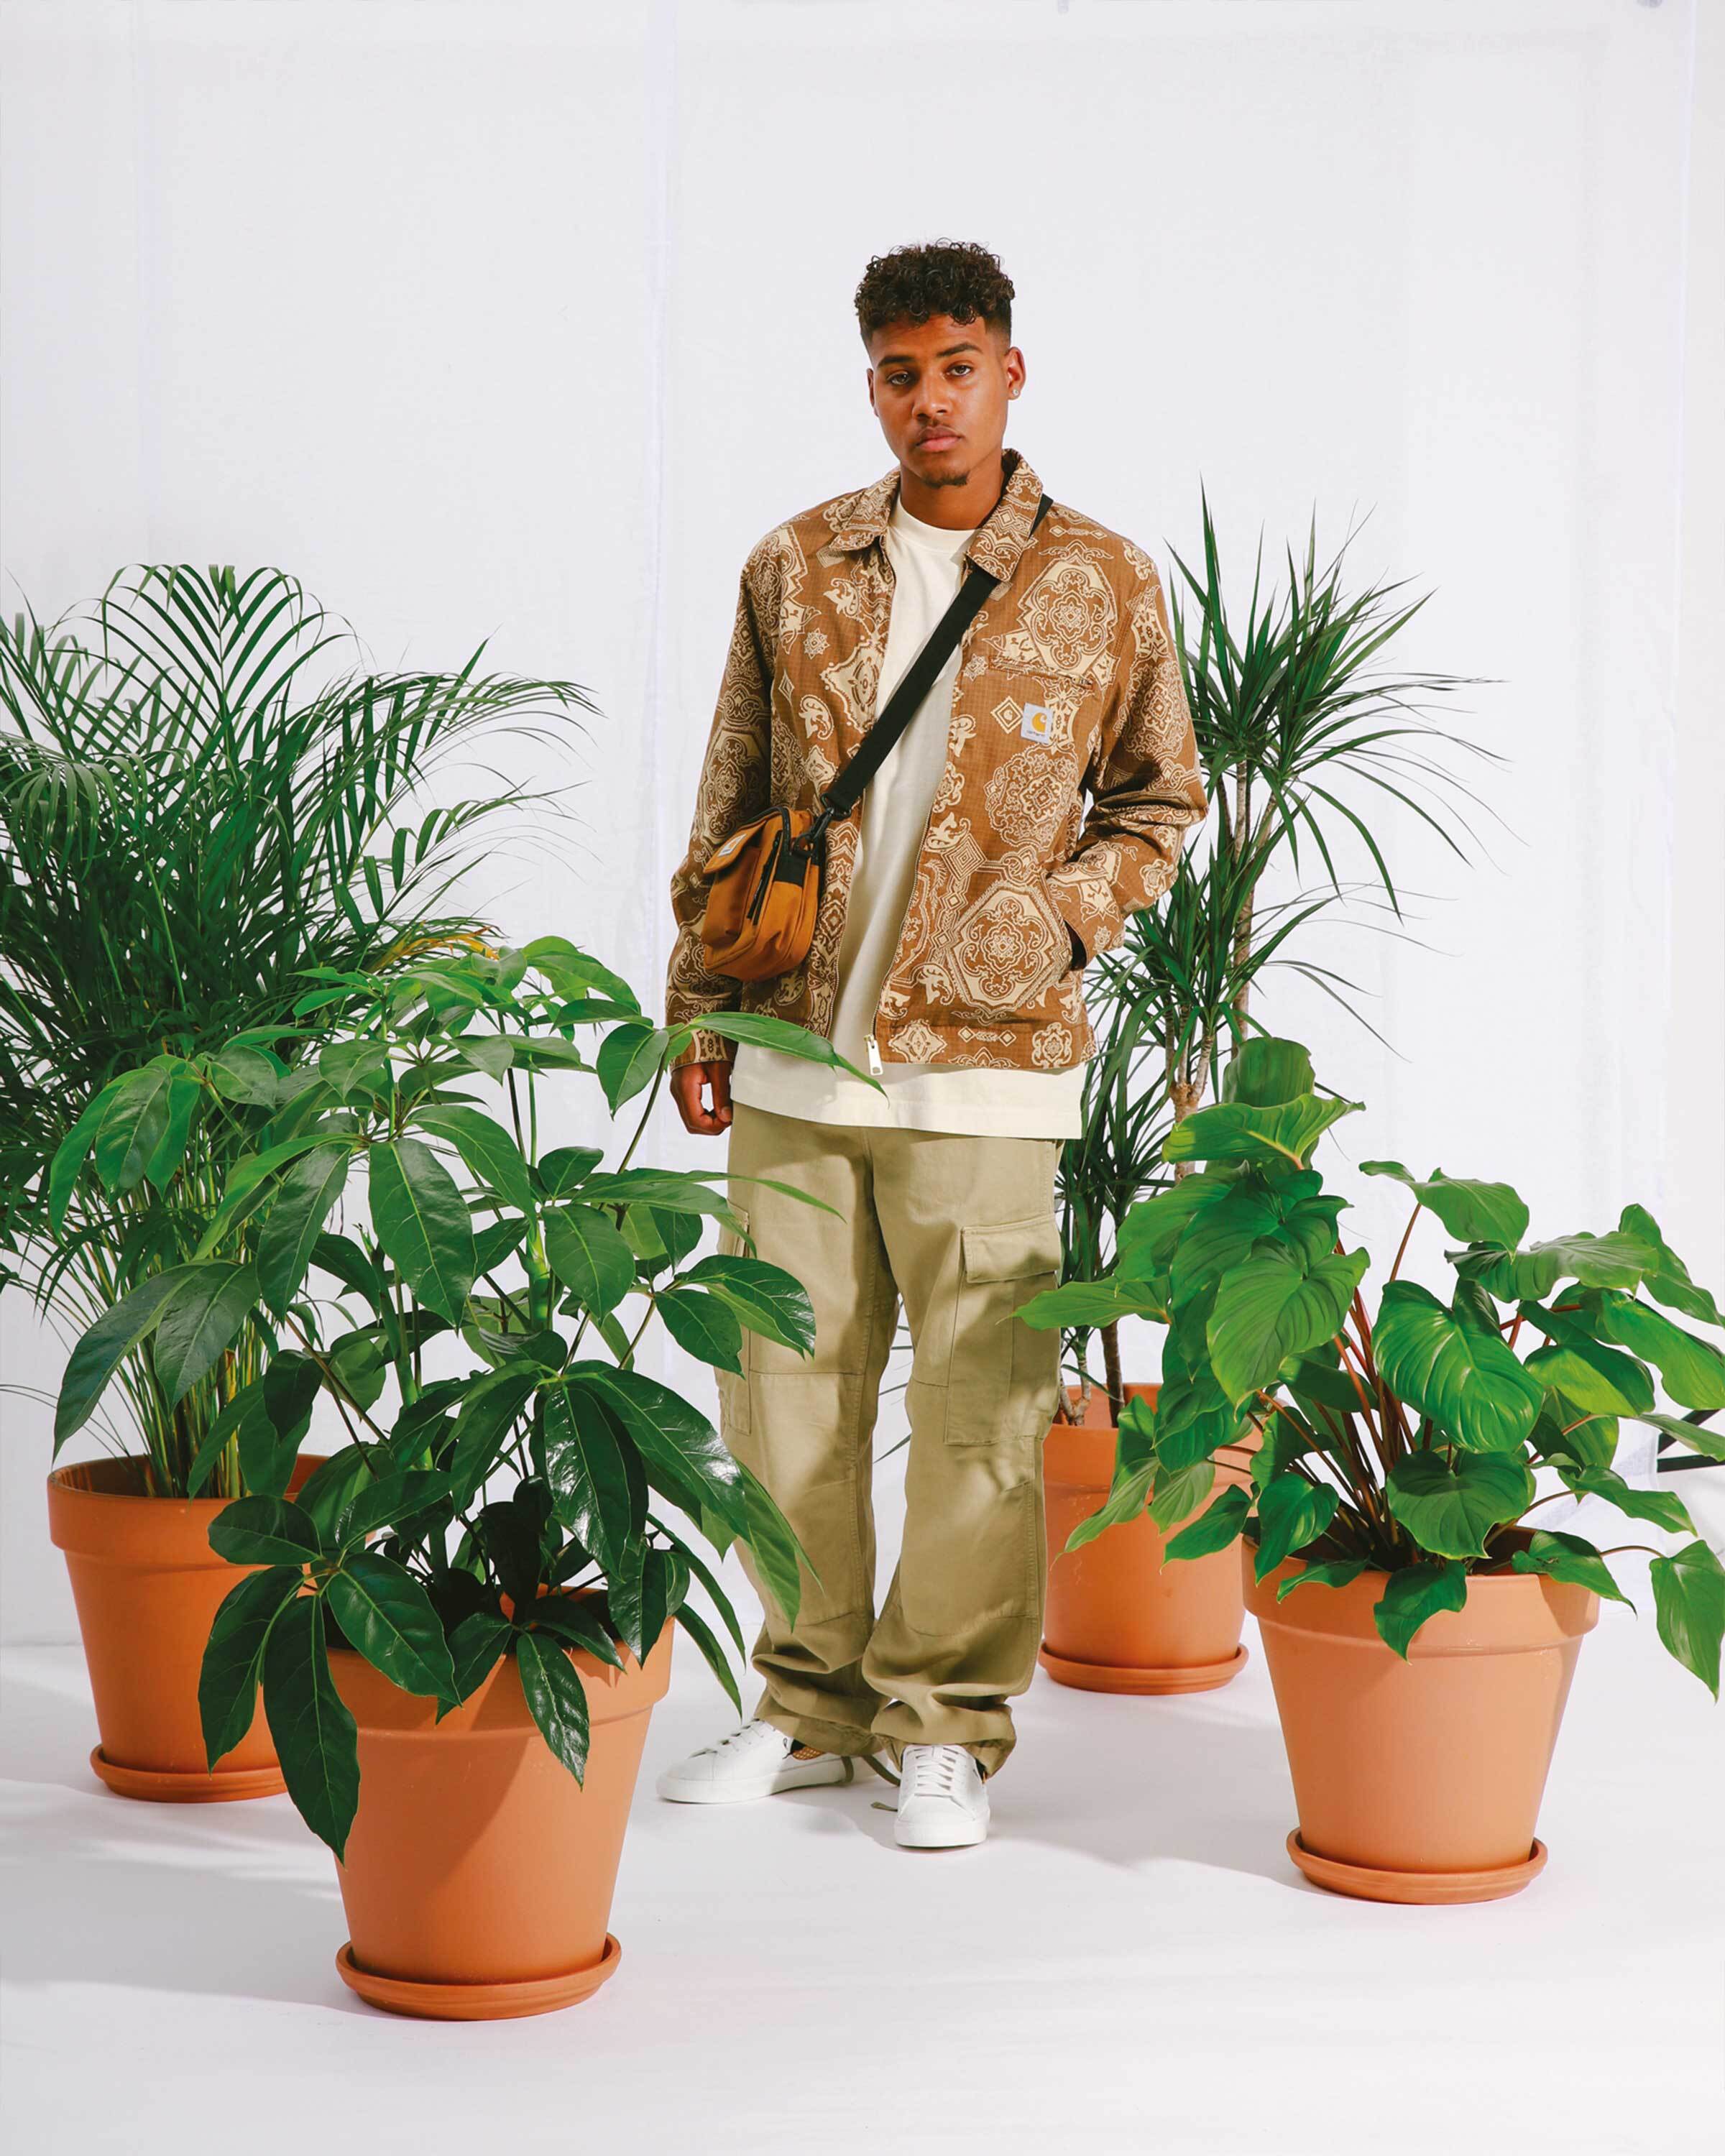 The Carhartt WIP collection